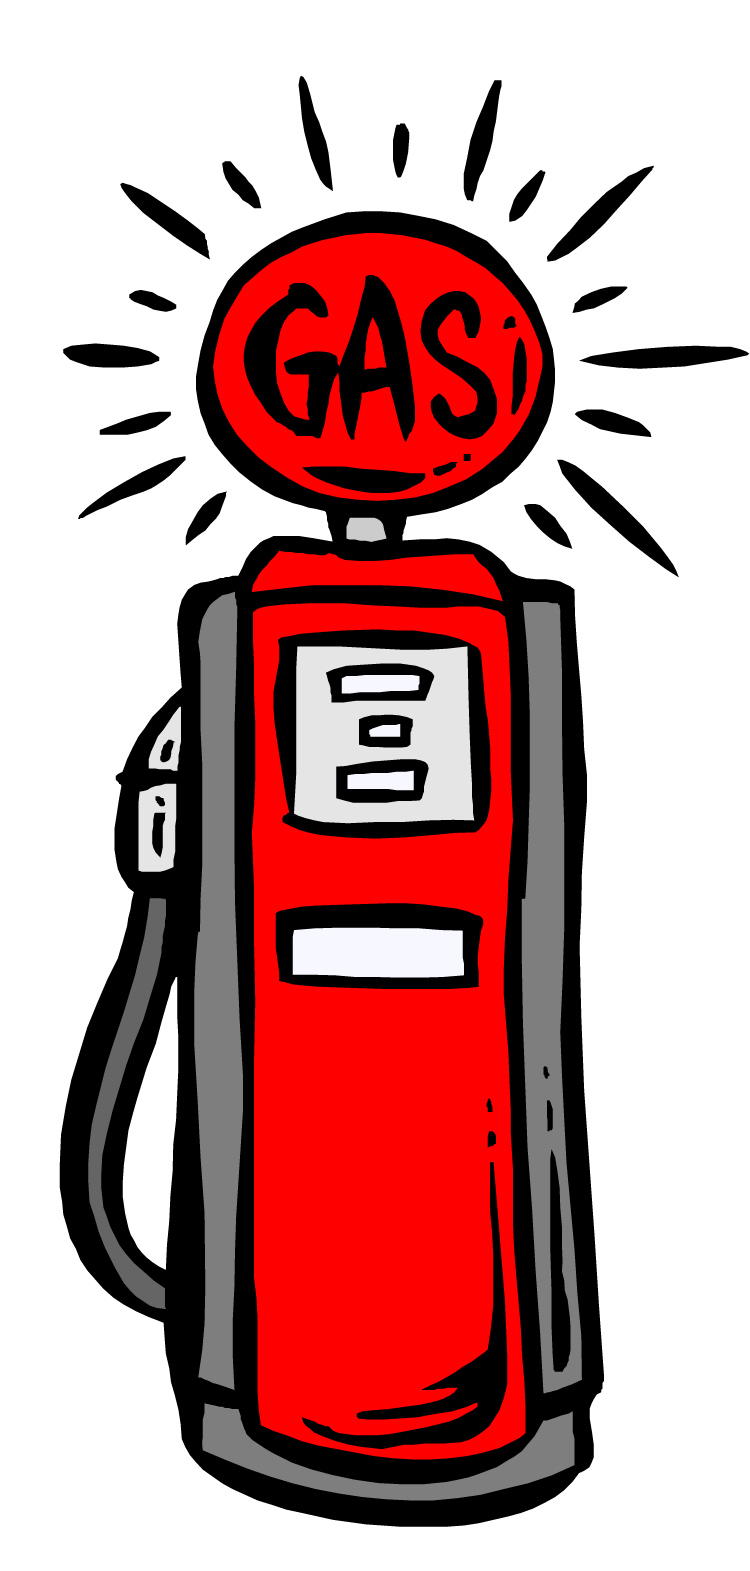 10 Cartoon Gas Pump Free Cliparts That You Can Download To You